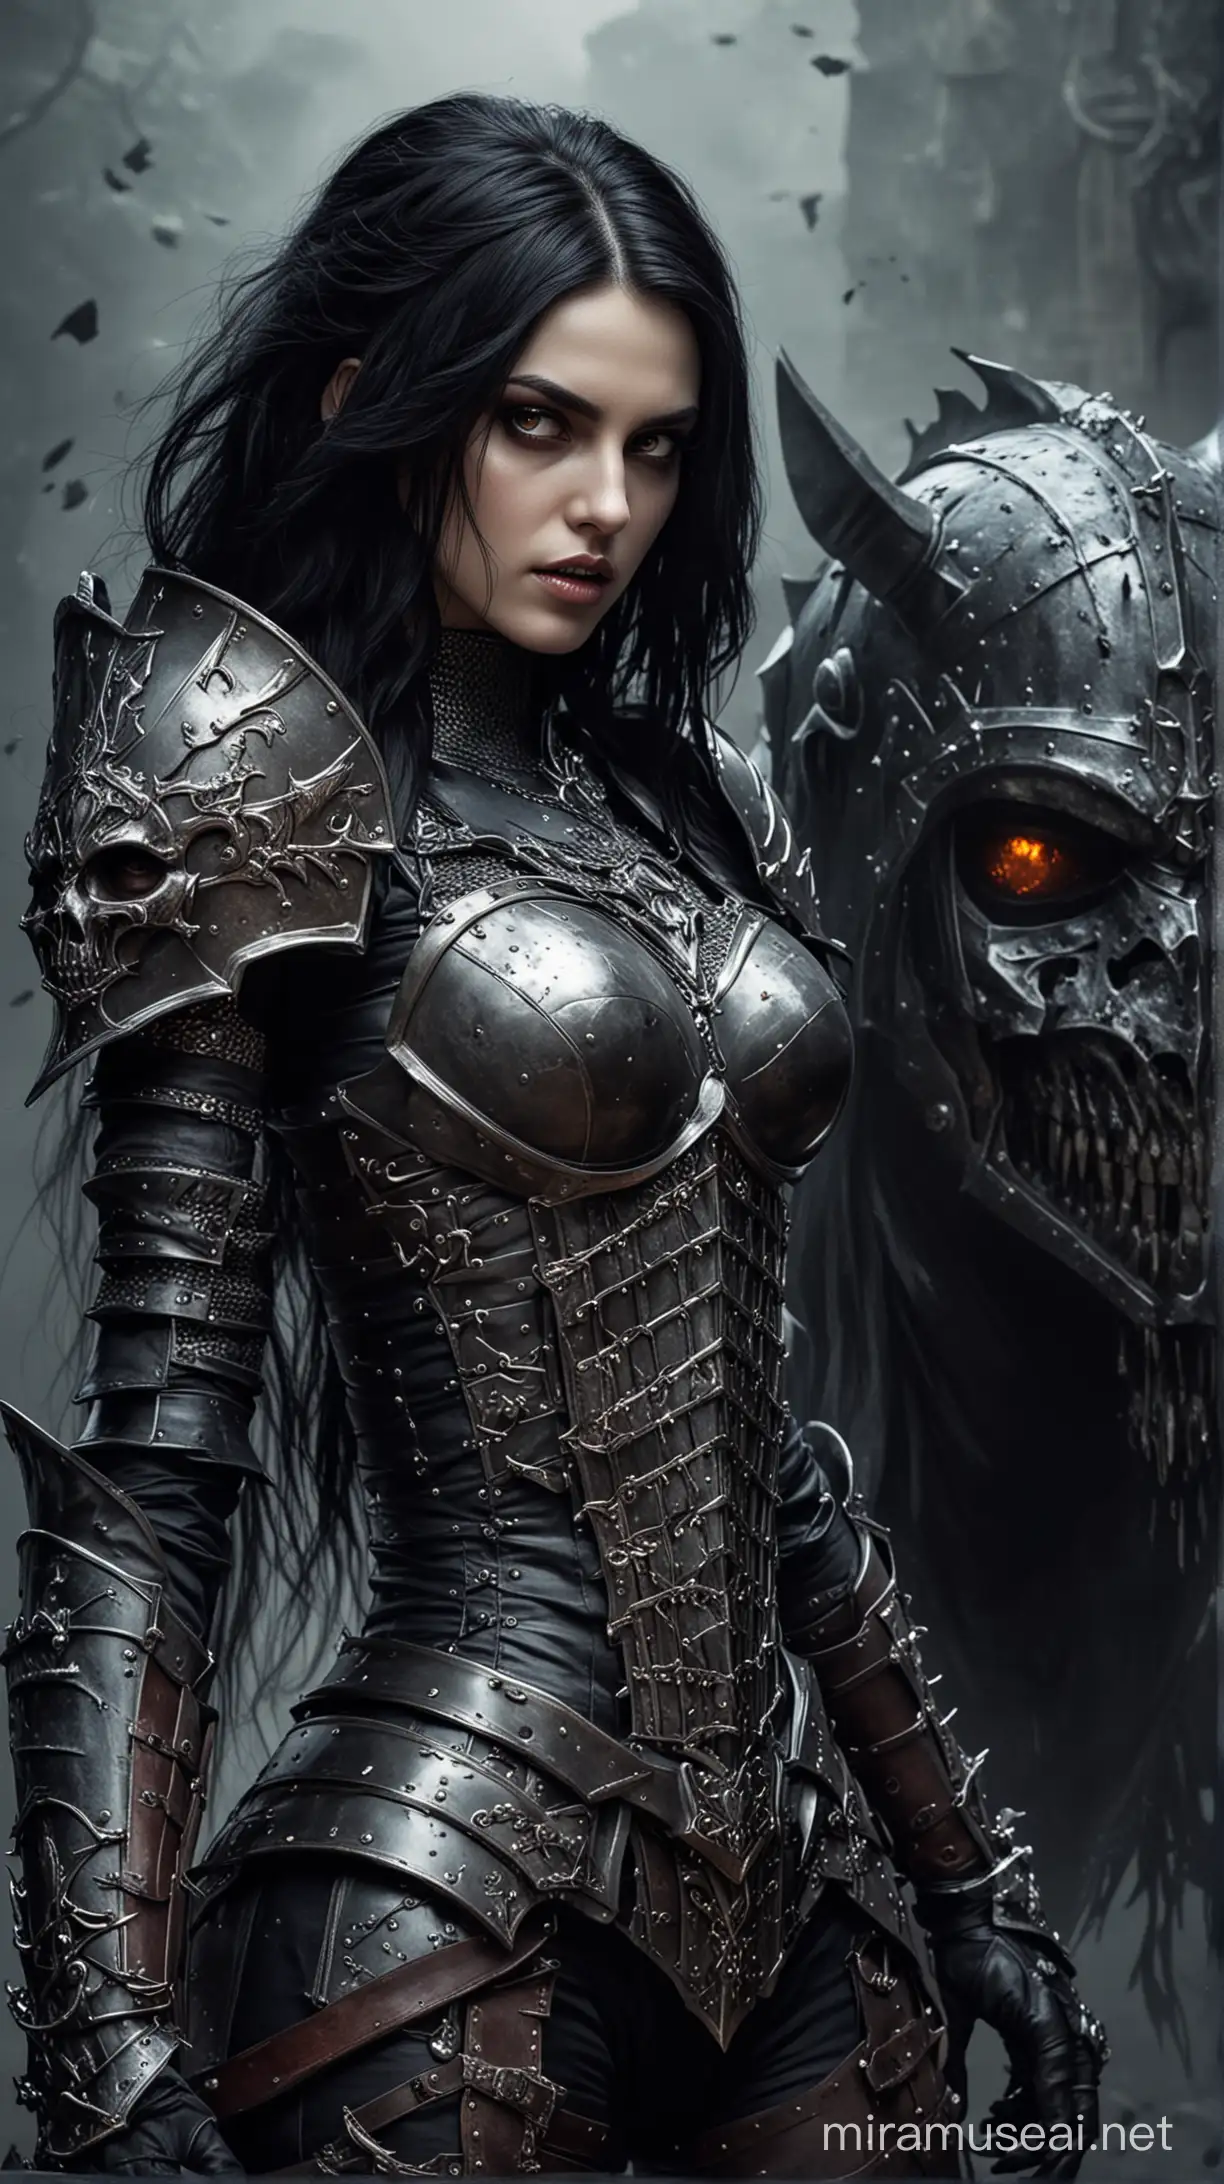 Vampire Girl and Armored Undead Knight